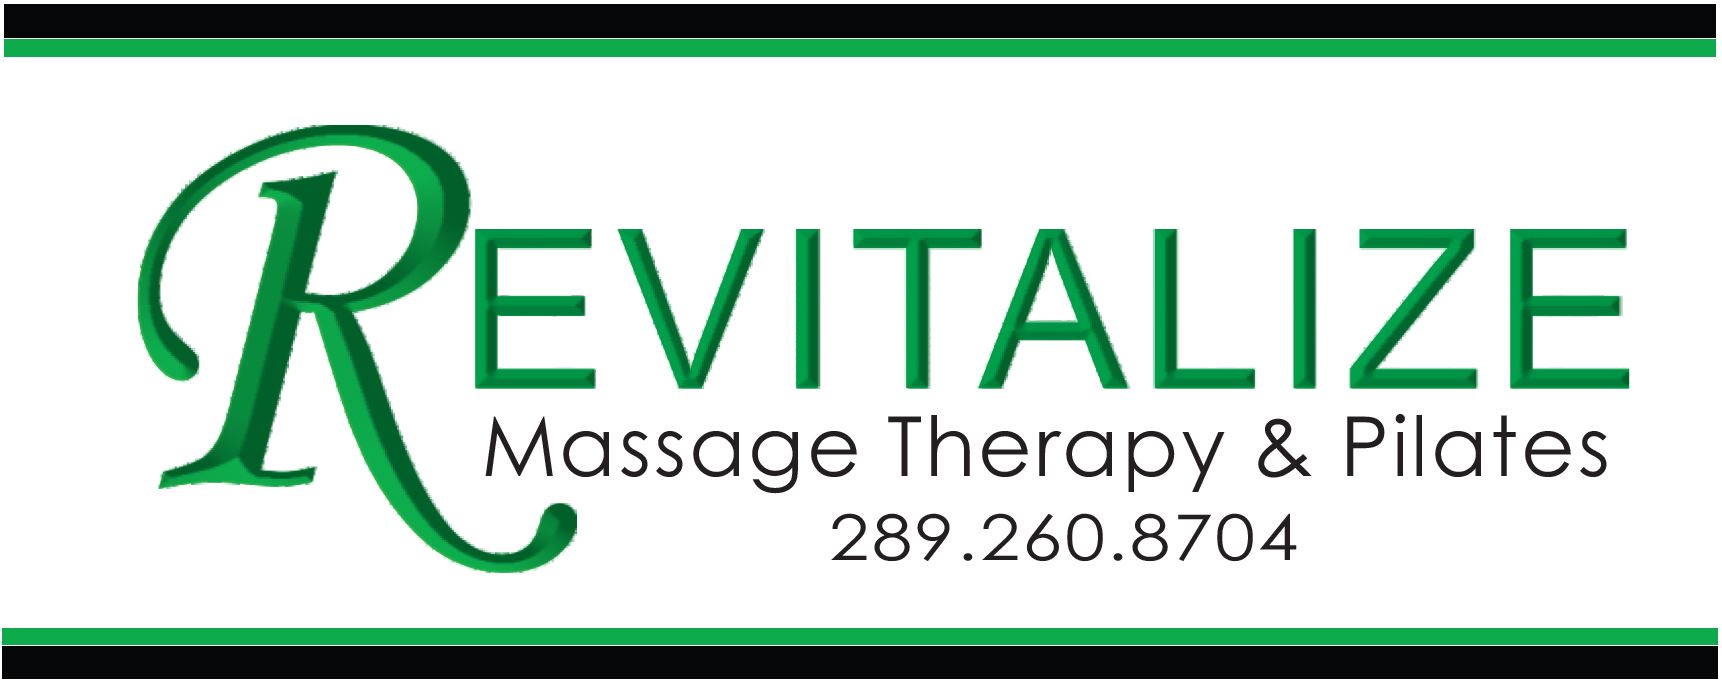 Revitalize Message Therapy & Pilates